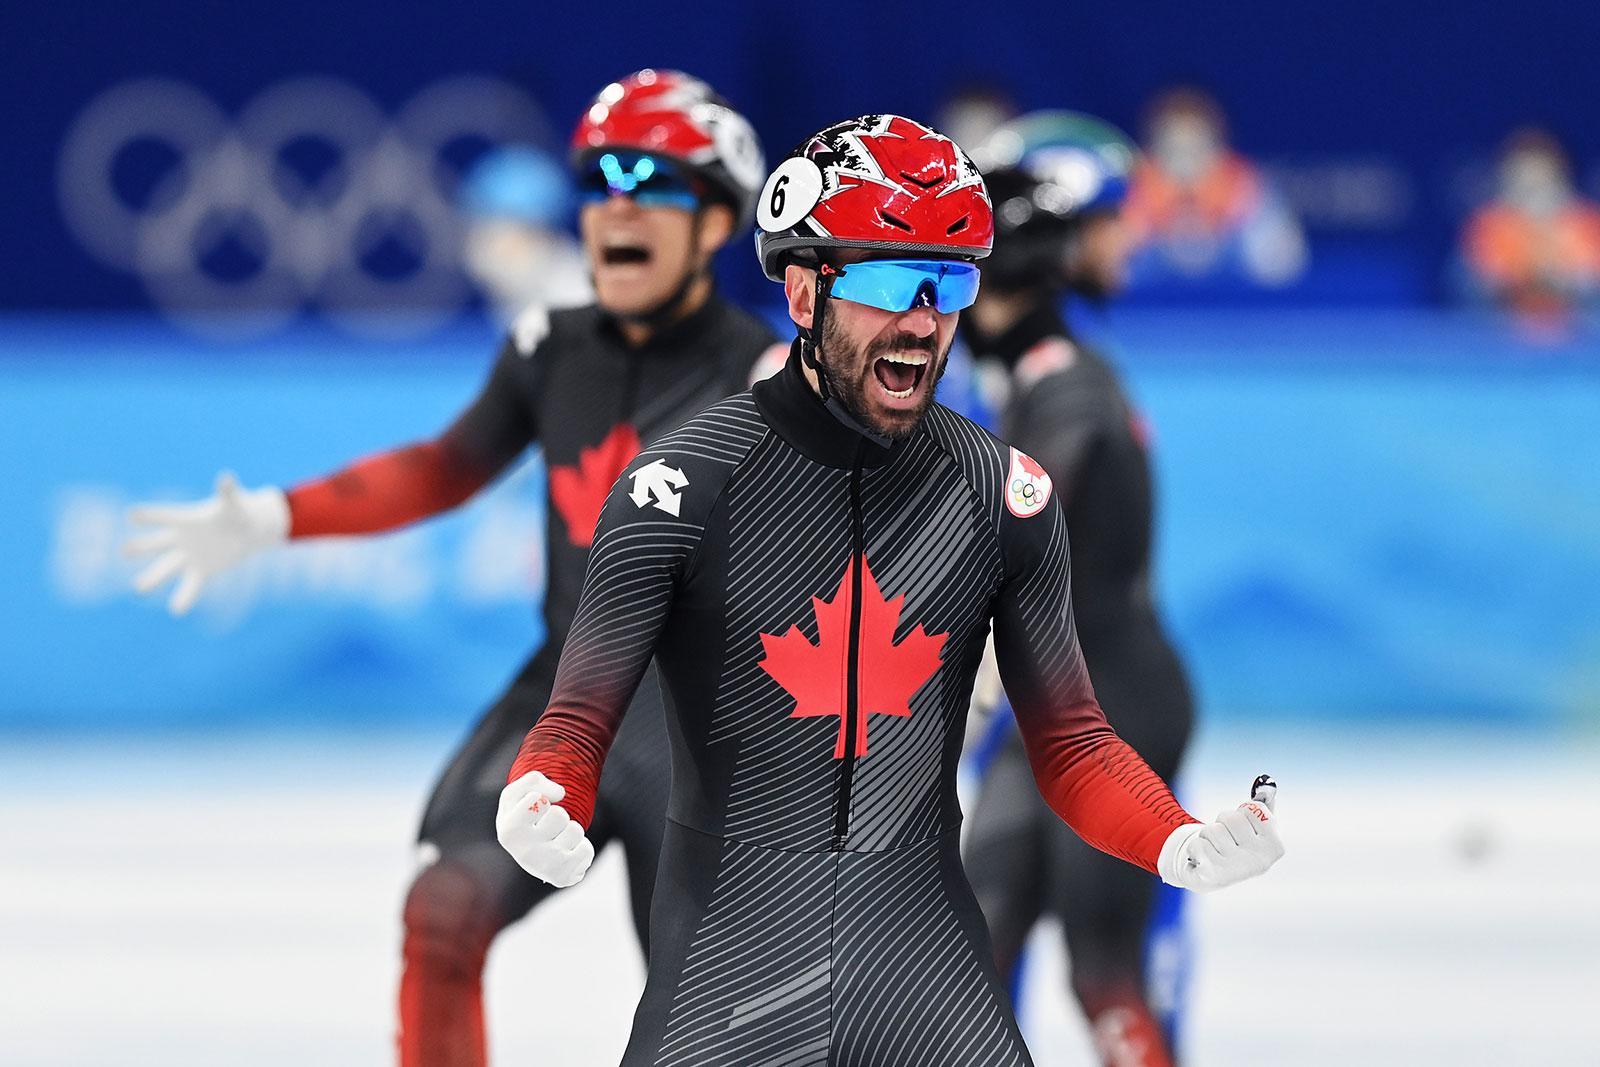 Canadian speed skater Charles Hemelin celebrates after winning the gold medal in the men's 5,000m relay on February 16.